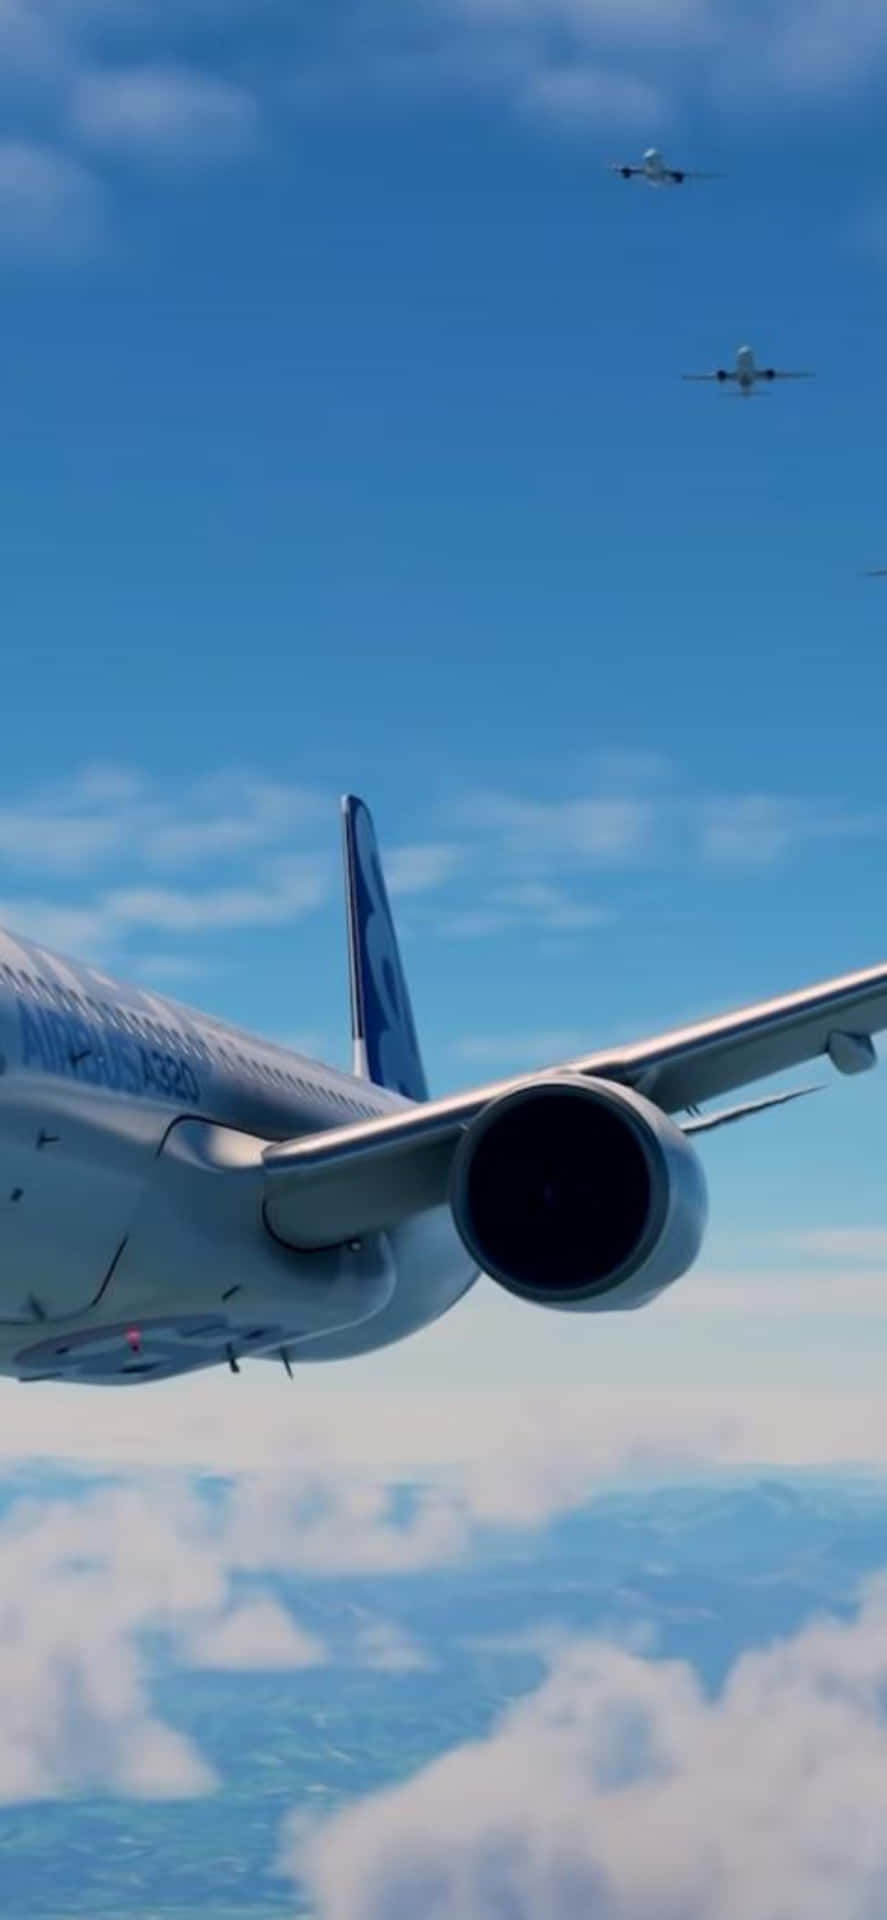 Take Flight From Anywhere with the Microsoft Flight Simulator on Iphone Xs